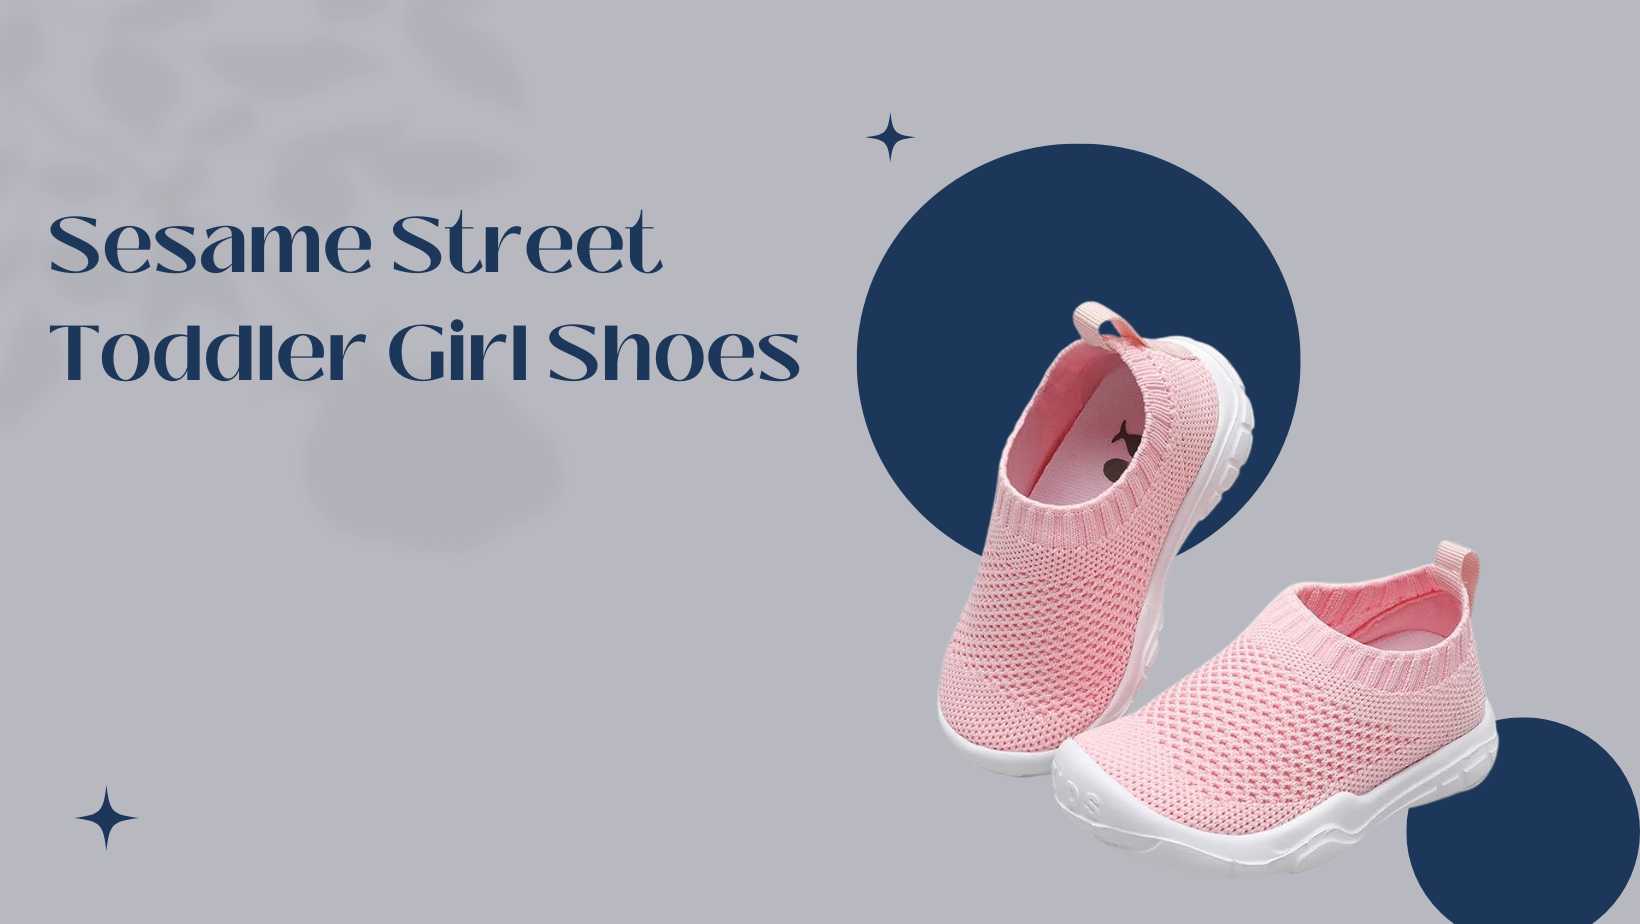 Sesame Street Toddler Girl Shoes: Stylish and Comfortable Footwear for Your Little One